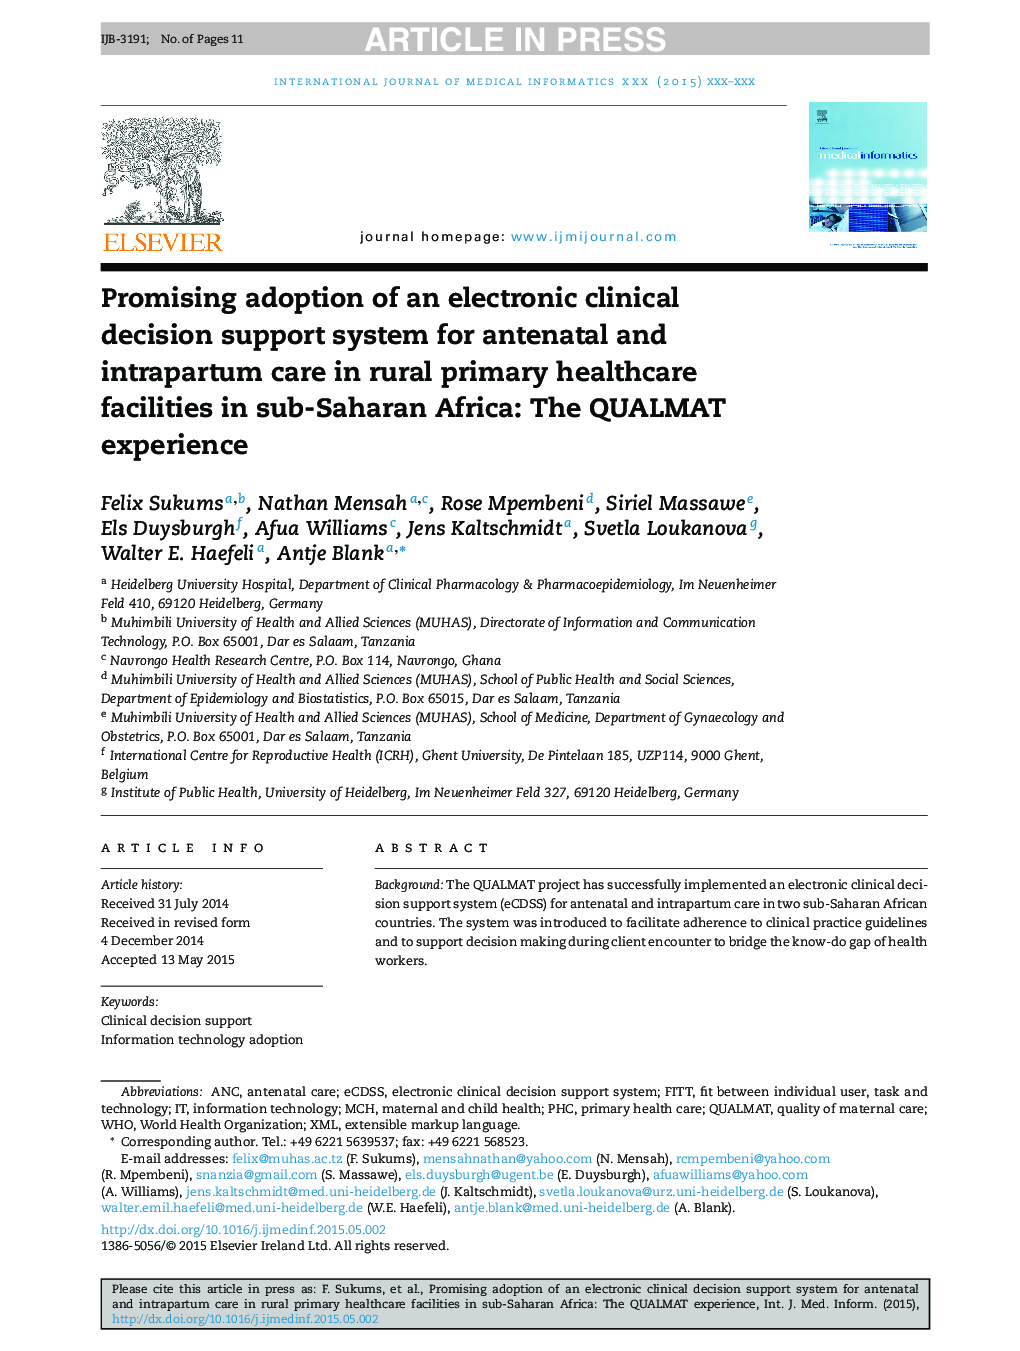 Promising adoption of an electronic clinical decision support system for antenatal and intrapartum care in rural primary healthcare facilities in sub-Saharan Africa: The QUALMAT experience